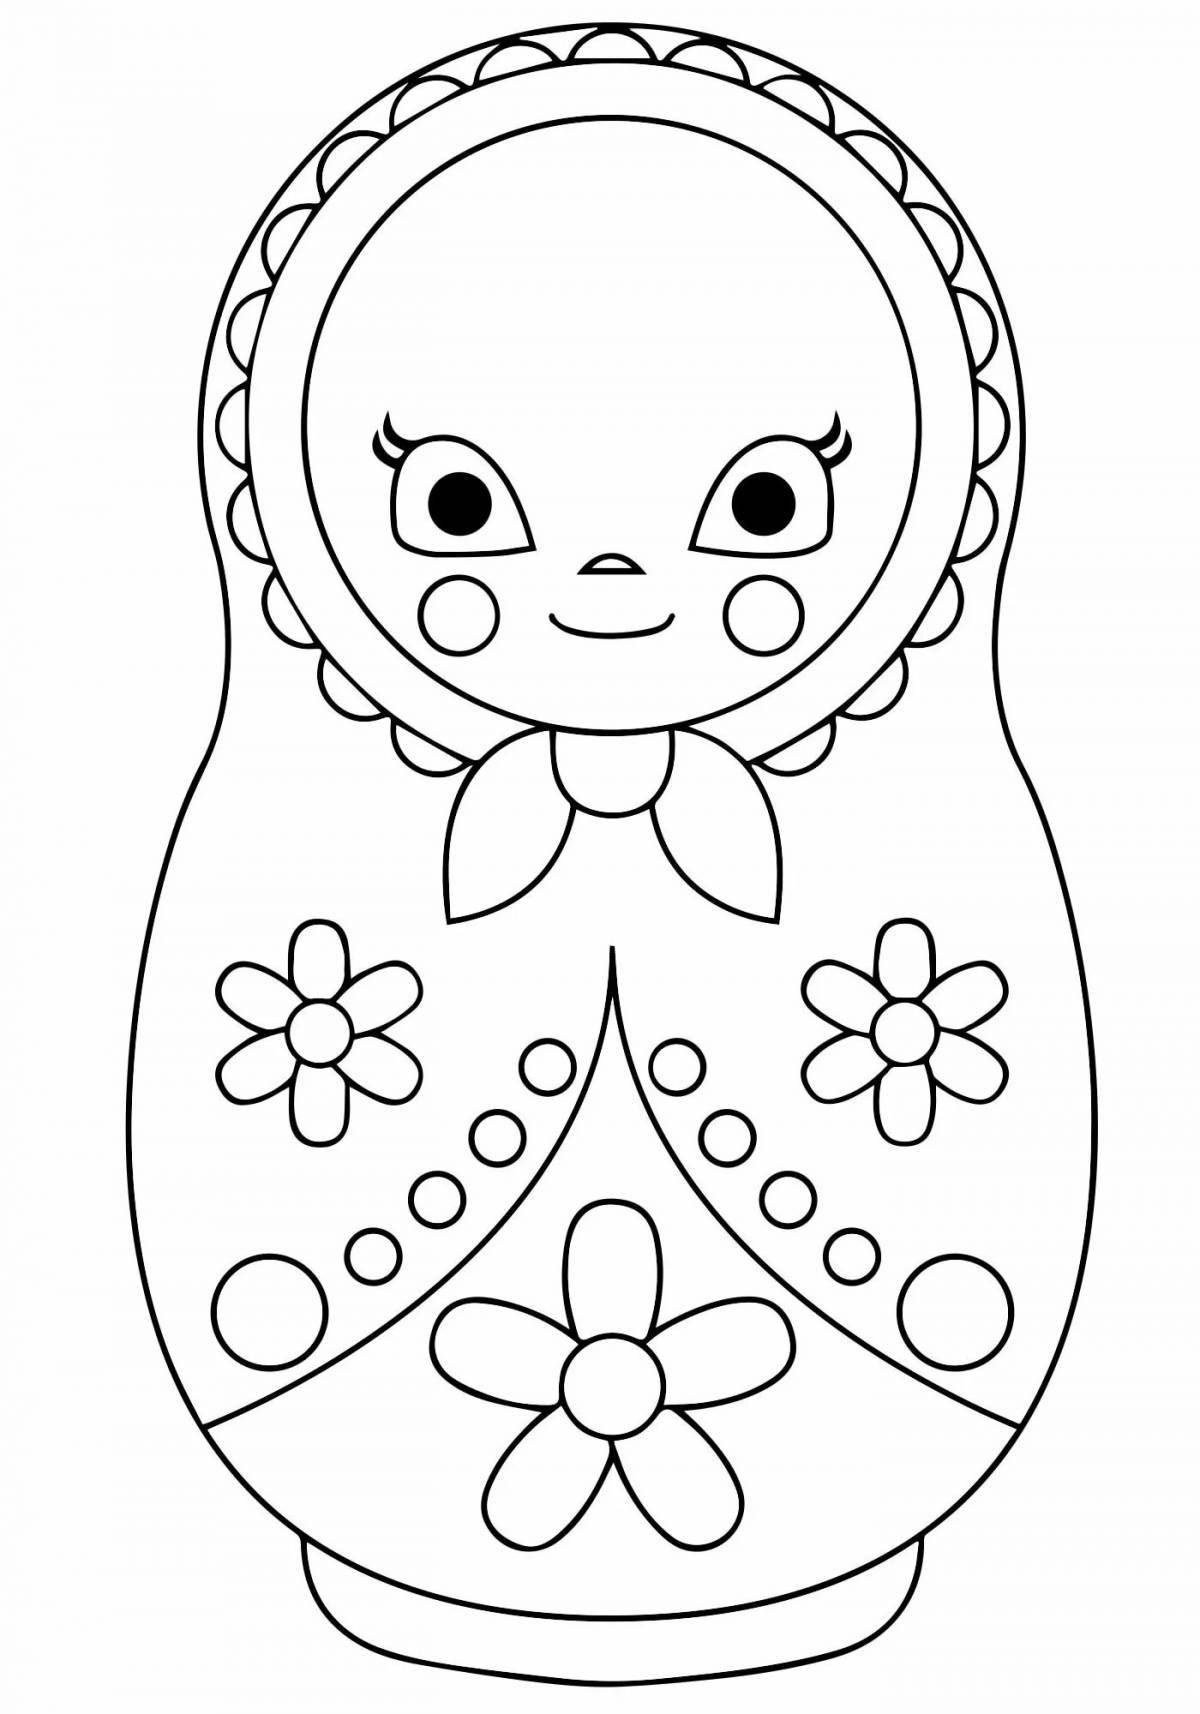 Adorable nesting dolls coloring for kids